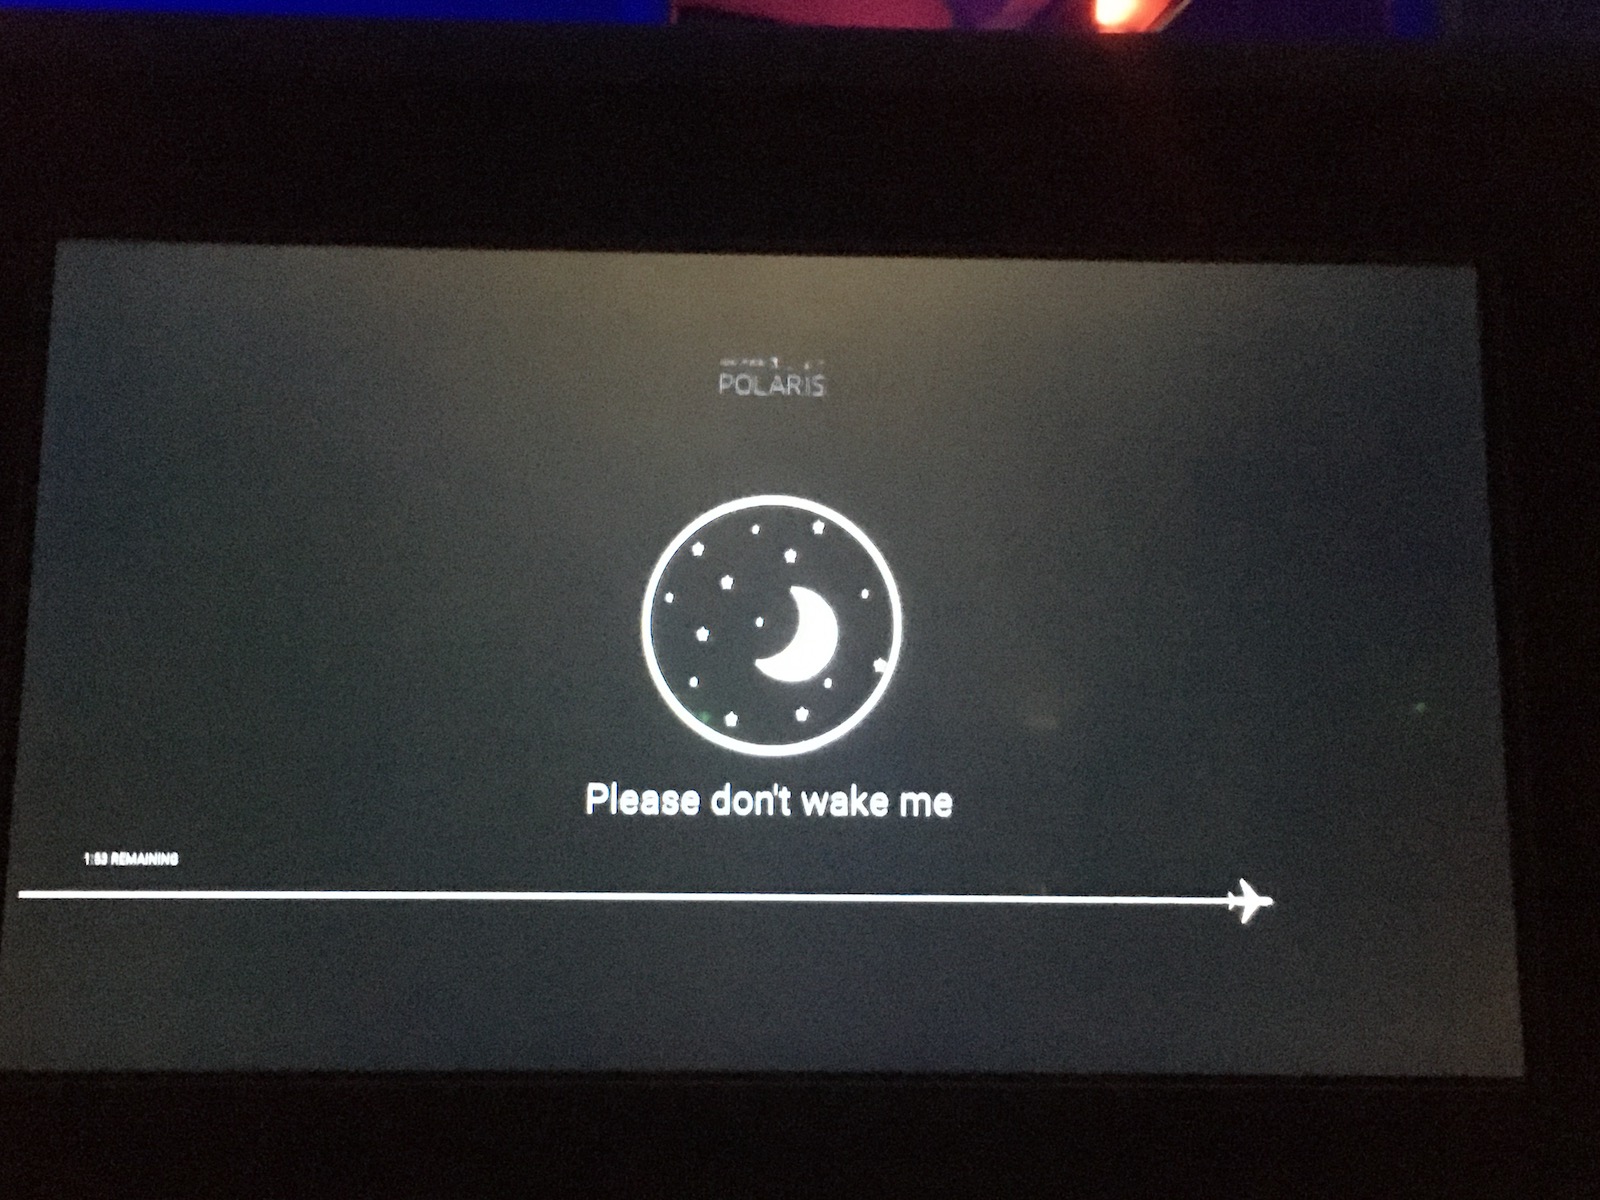 Do not disturb on TV - best features - United Polaris business class review